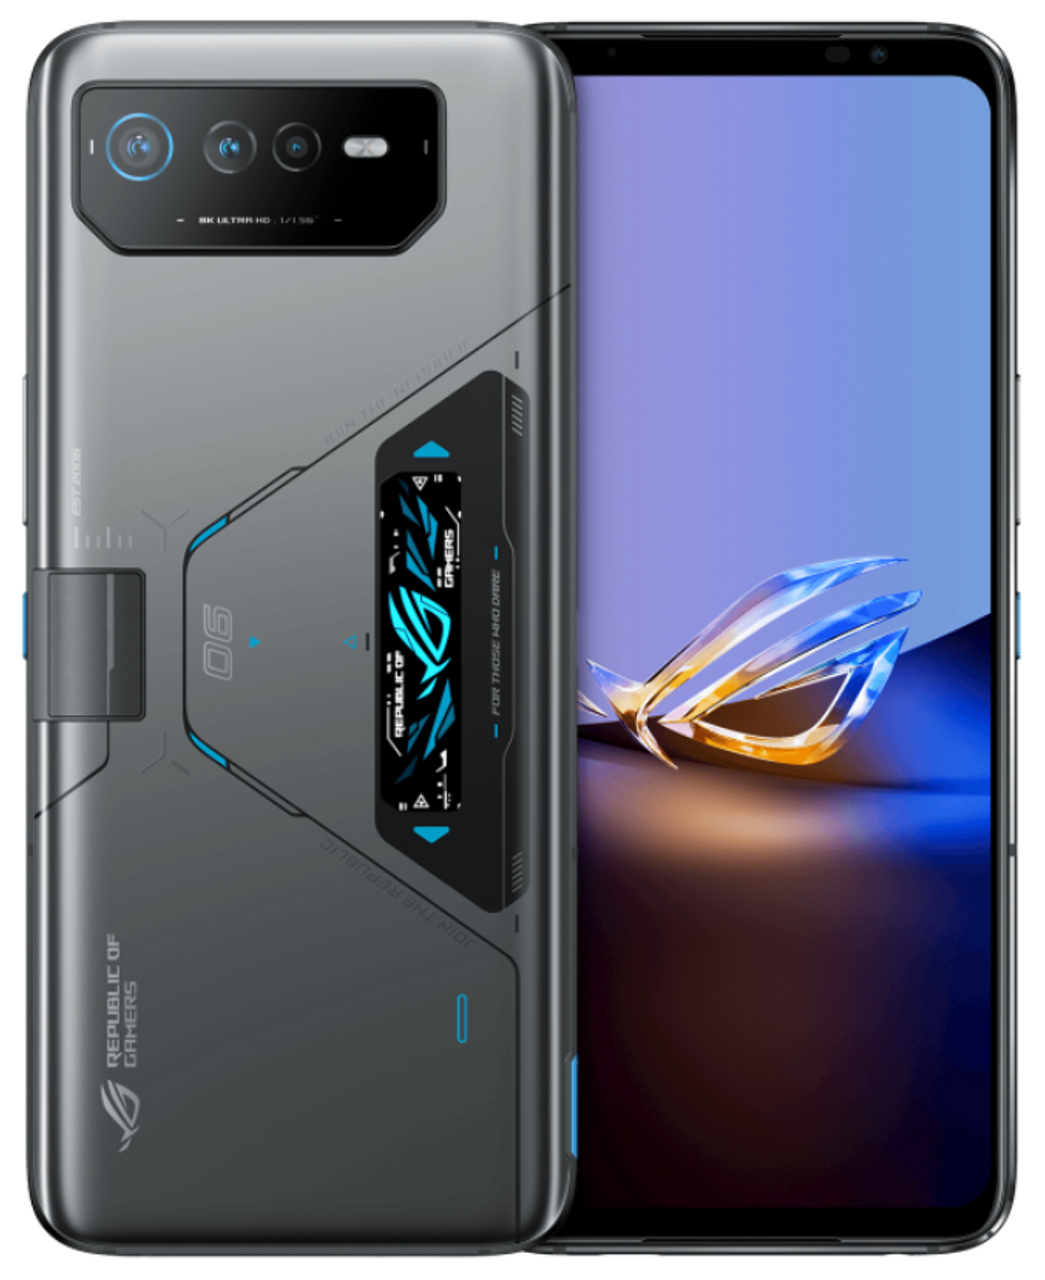  ASUS ROG Phone 6D Ultimate 5G AI2203 Dual 512GB 16GB RAM  Factory Unlocked (GSM Only  No CDMA - not Compatible with Verizon/Sprint)  Aeroactive Cooler 6 Included - Space Gray : Electronics